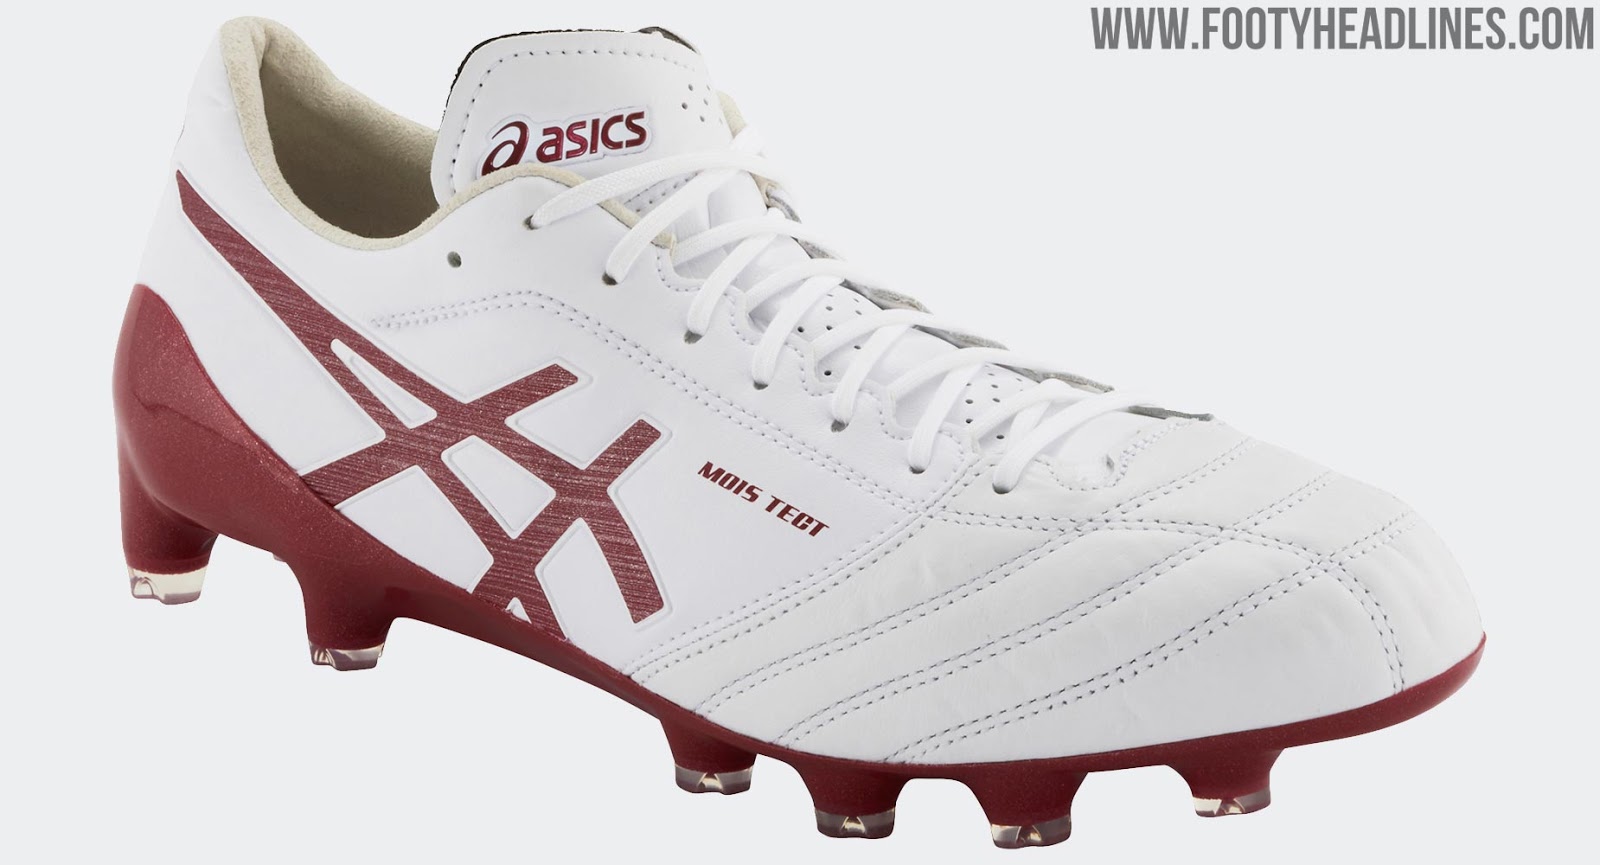 Next Gen Asics Ds Light X Fly 4 Football Boots All About Iniesta S New Boots Footy Headlines